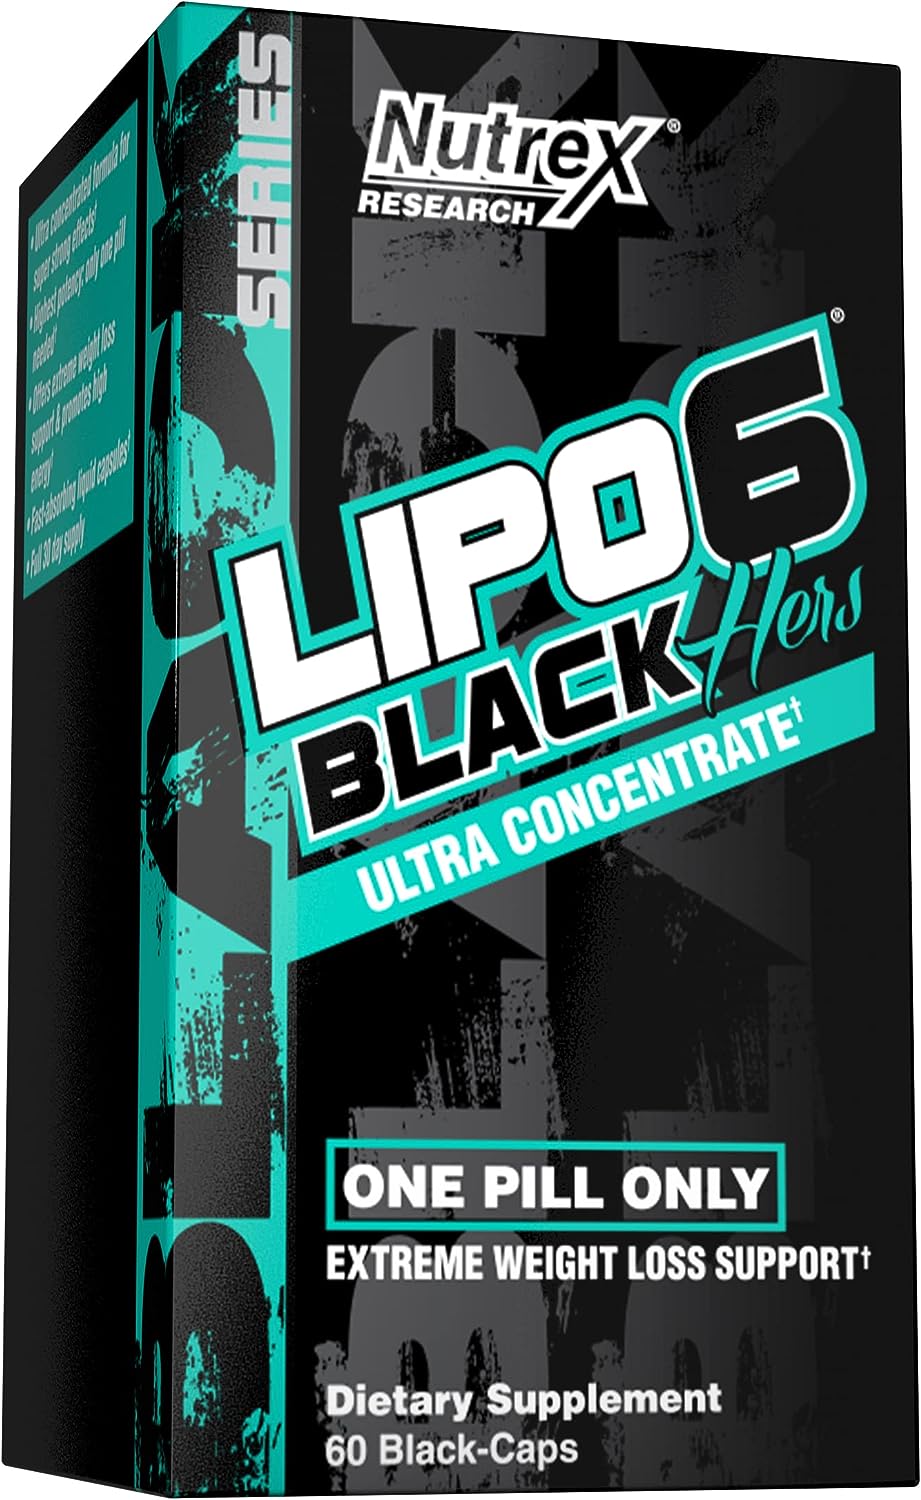 nutrex research lipo 6 black hers ultra concentrate weight loss pills for women fat burner appetite suppressant metaboli 1